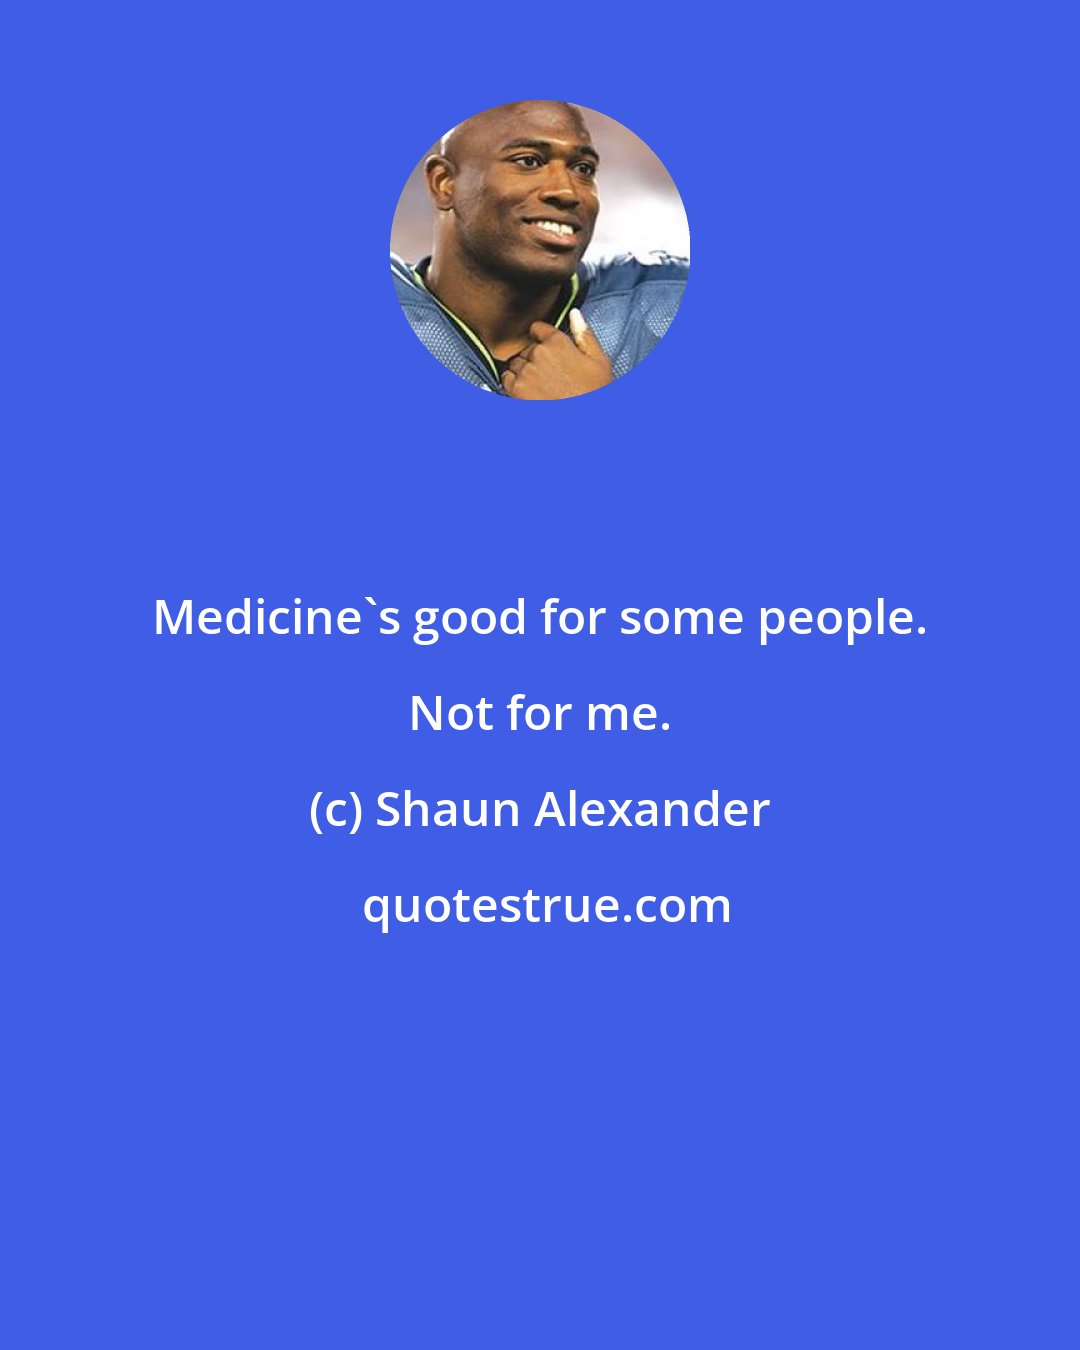 Shaun Alexander: Medicine's good for some people. Not for me.